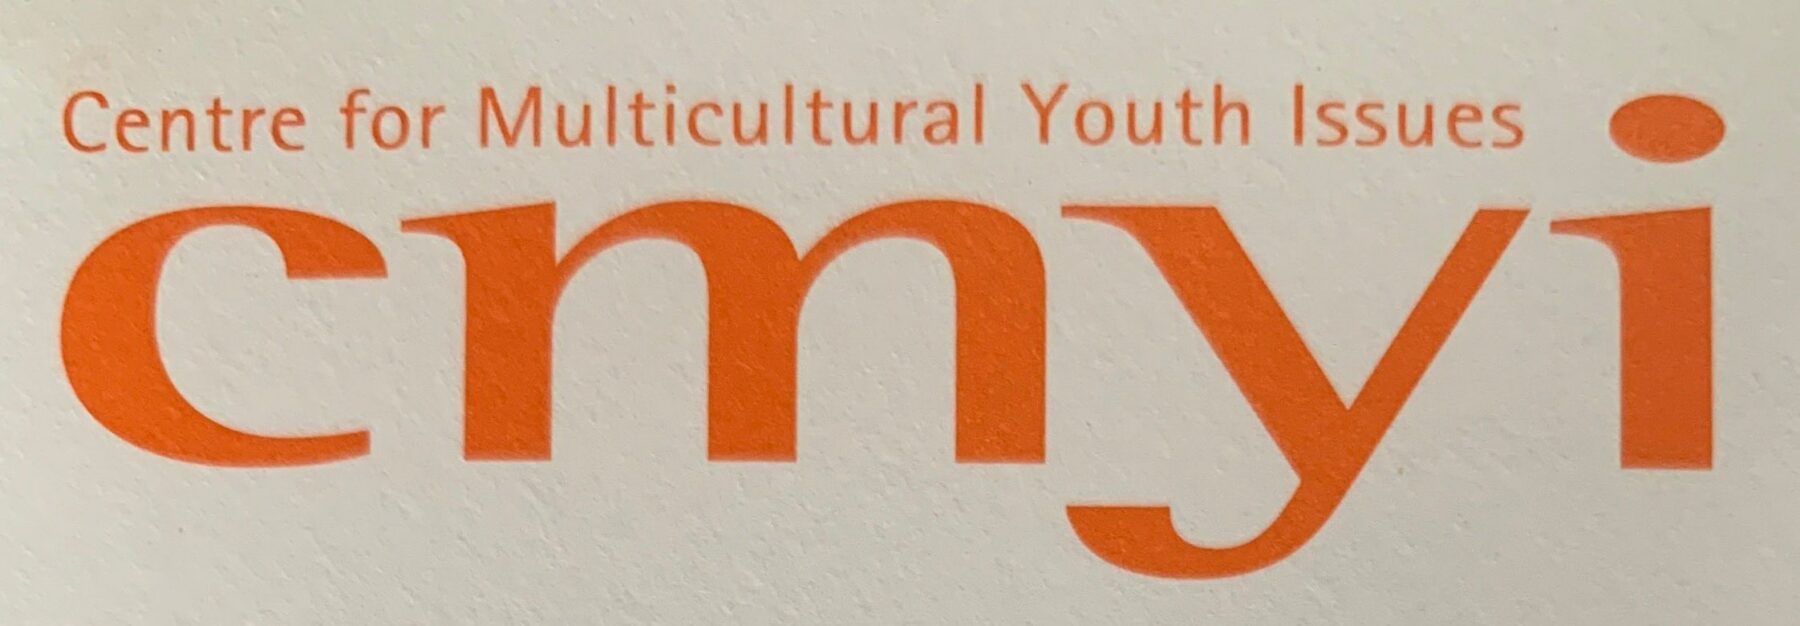 Centre for Multicultural Youth Issues (CMYI) logo